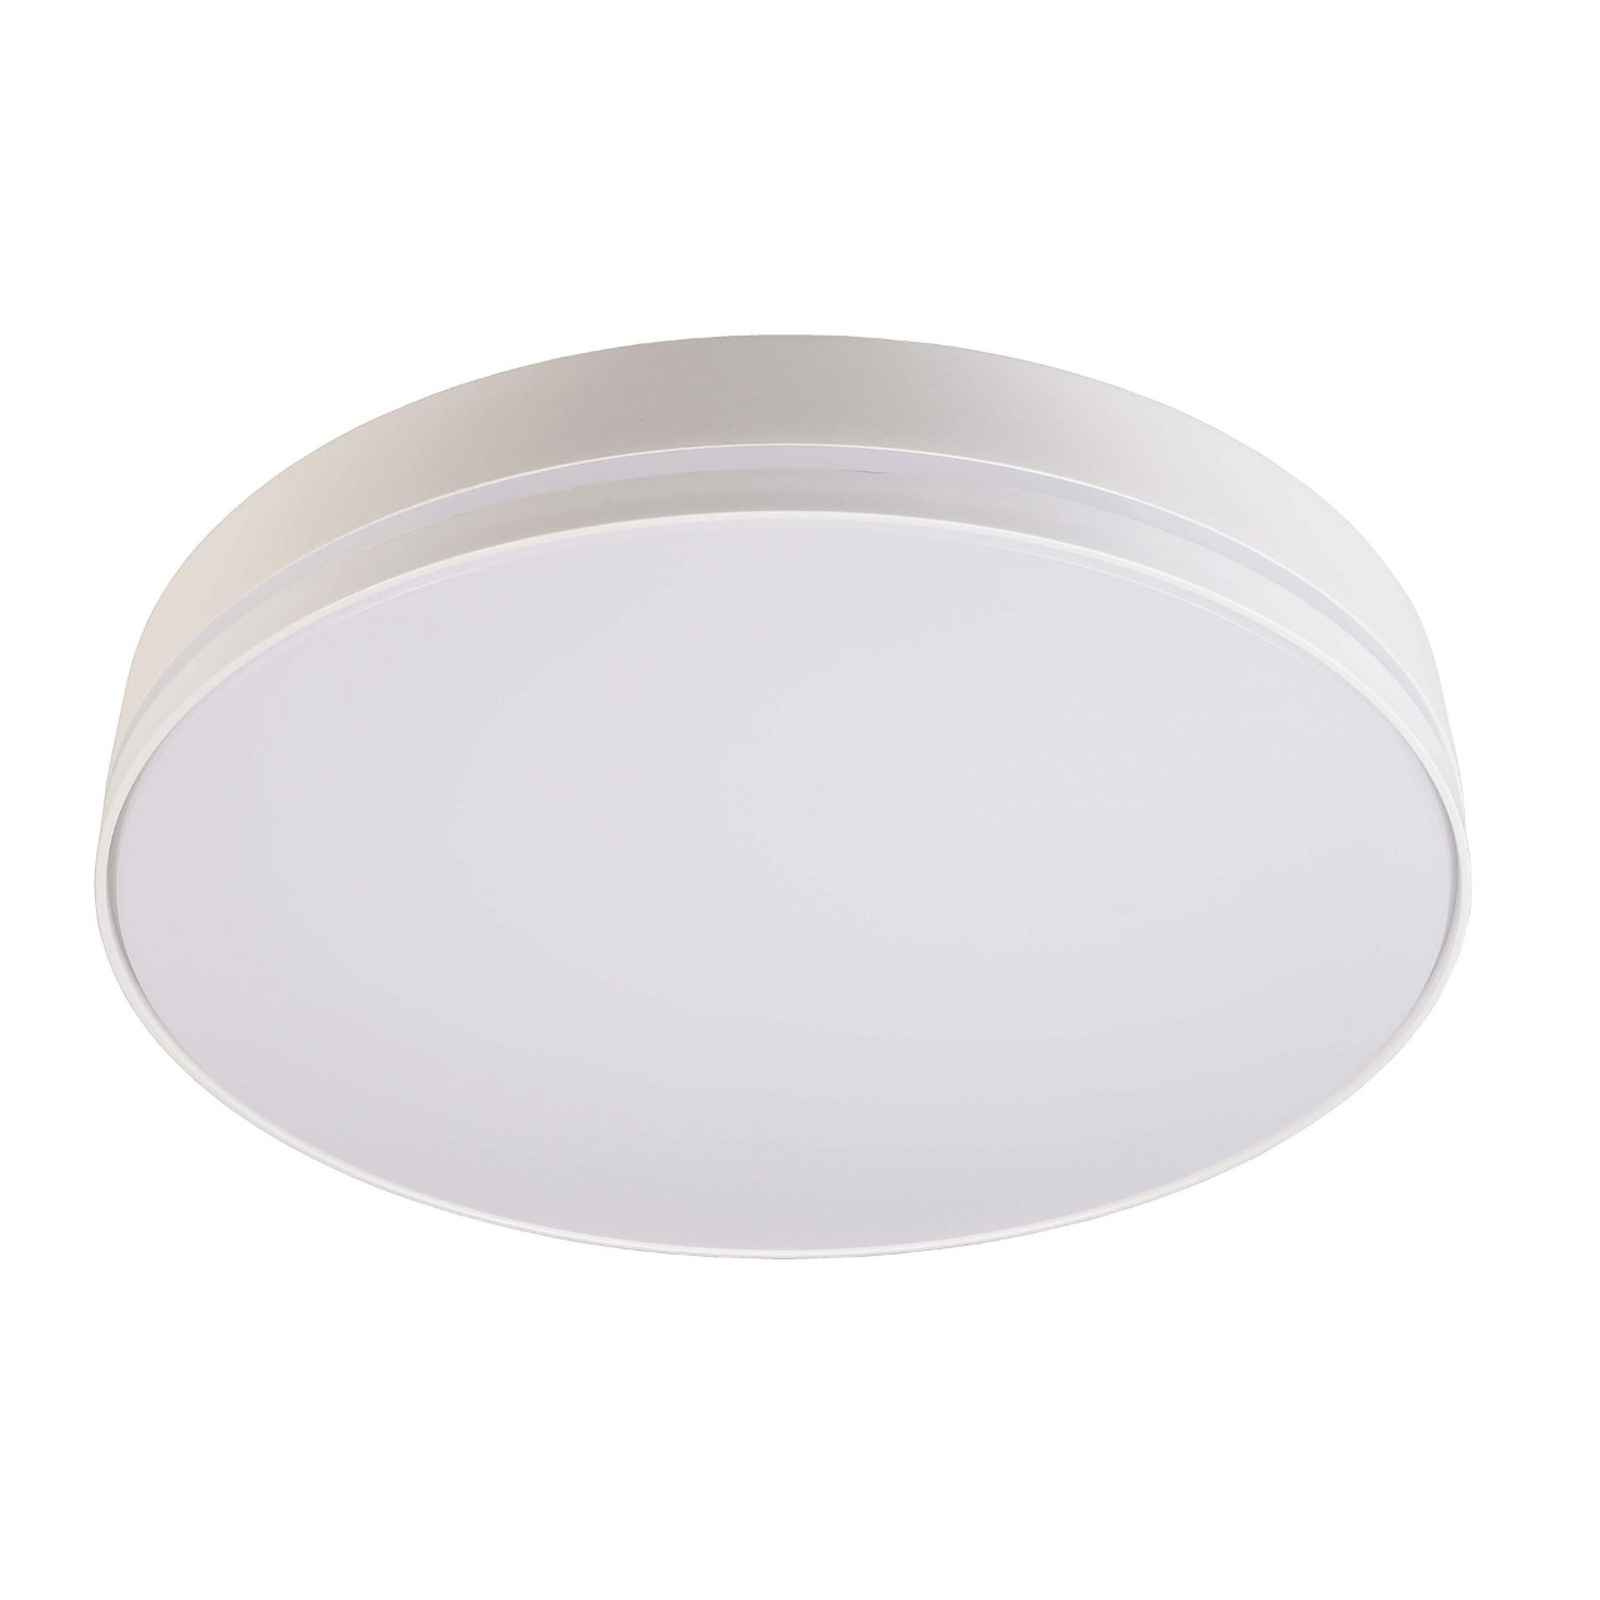 Subra LED ceiling light IP54 DALI-dimmable 3,000K